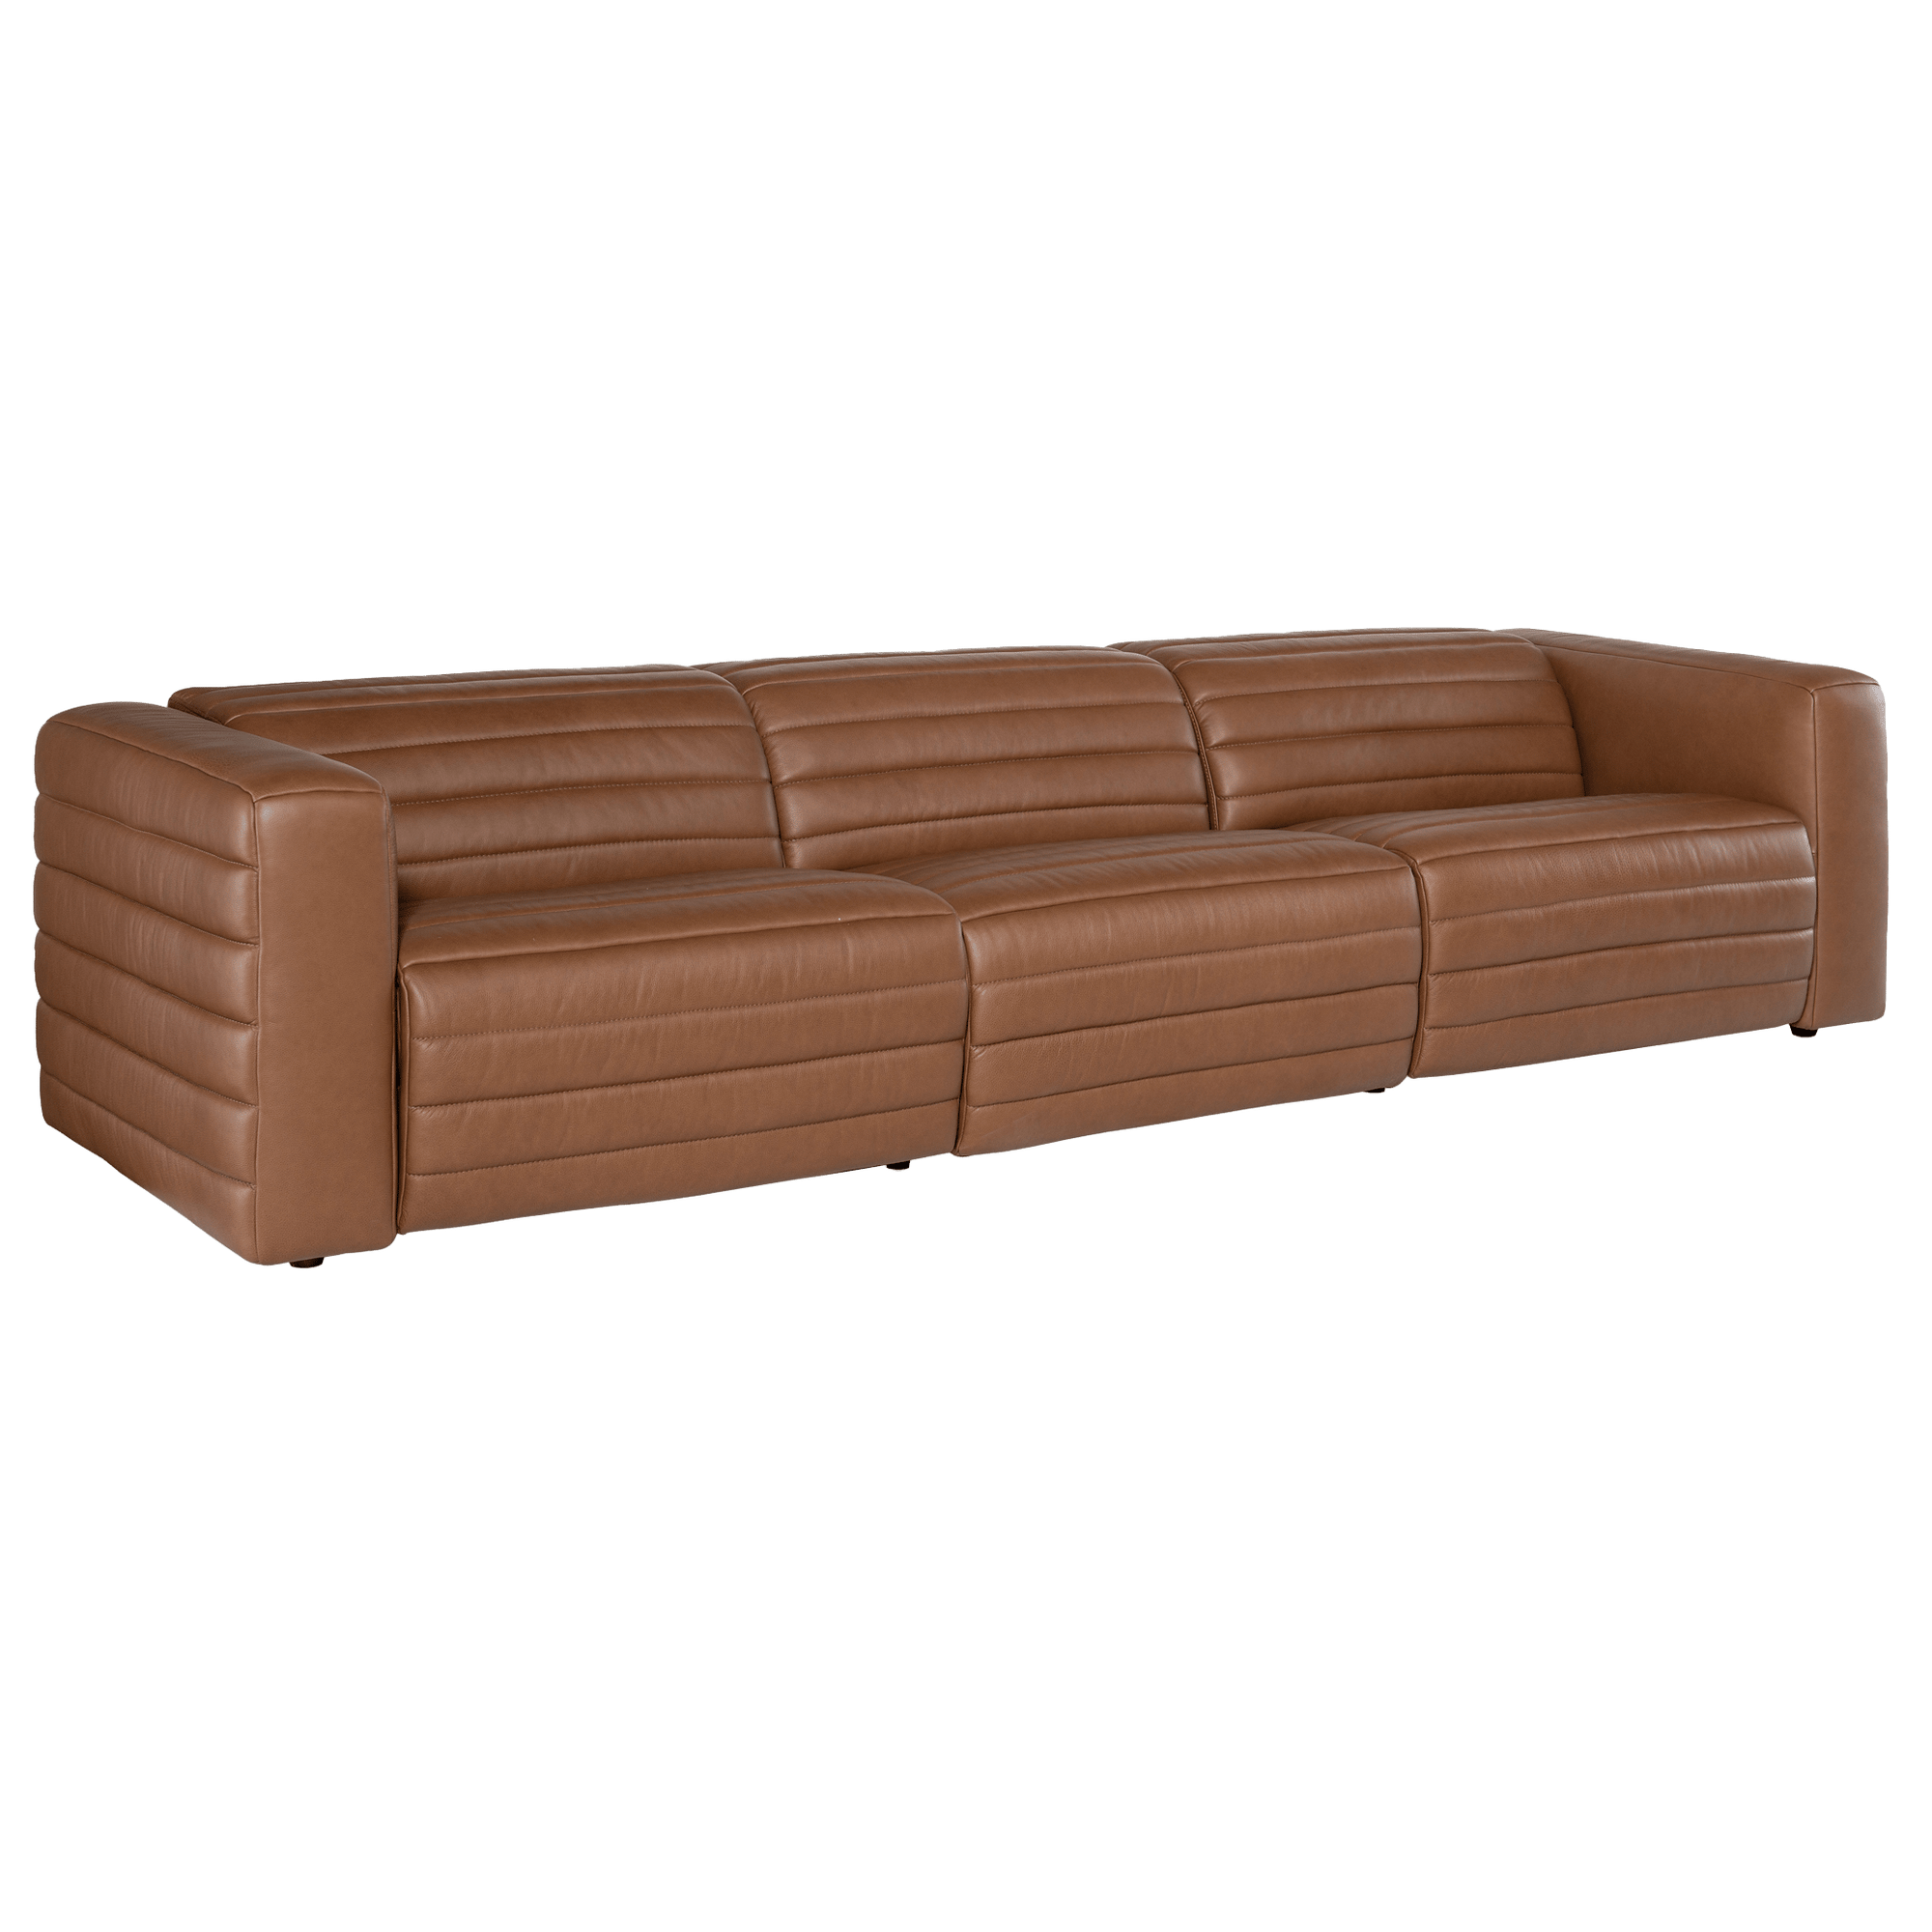 Cathal 124" Wide 3-Piece Upholstered Leather Sofa, Brown